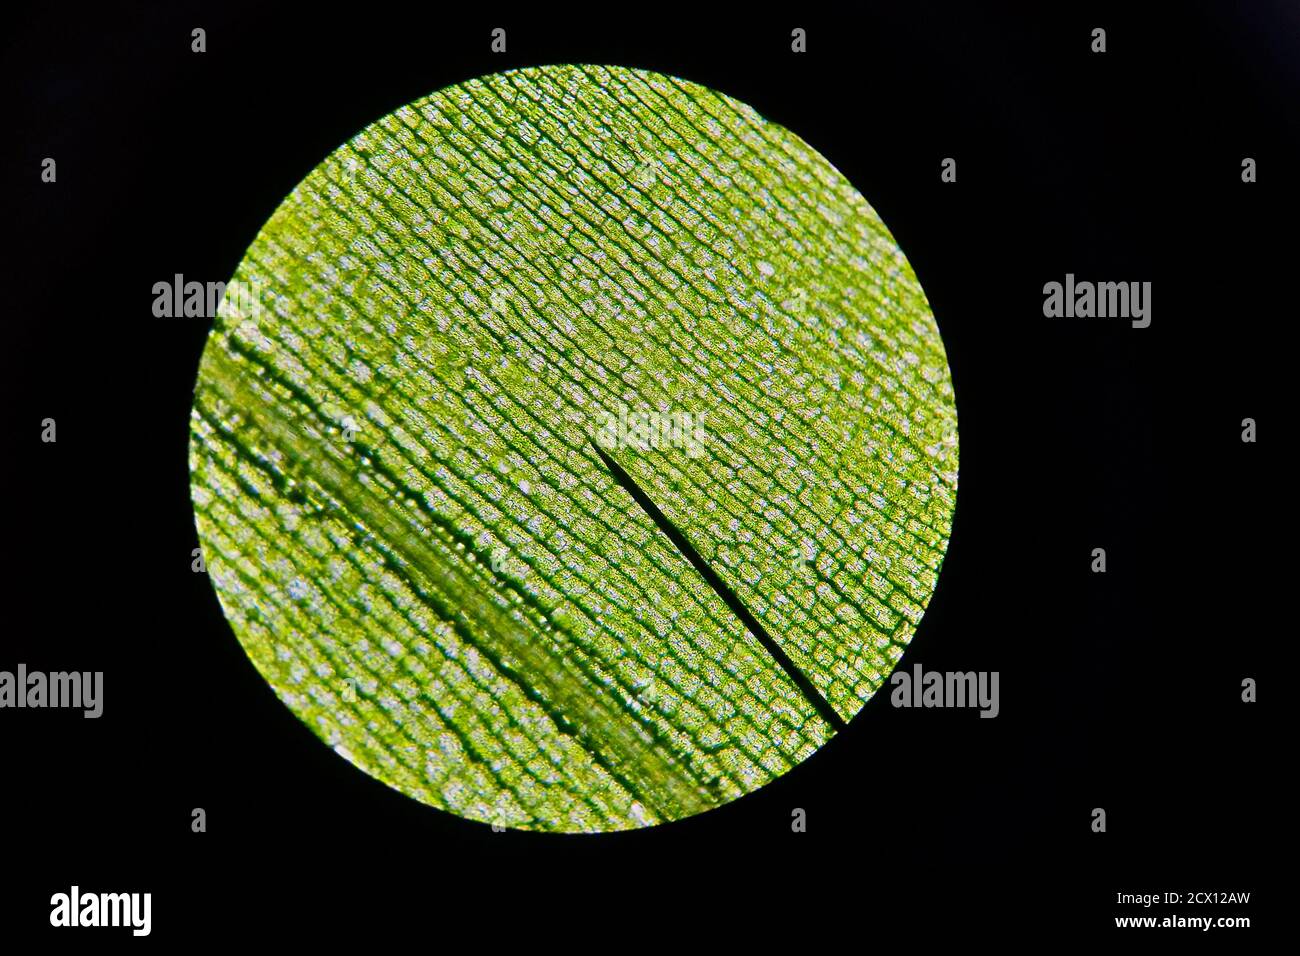 Detailed view of the cells of a leaf of waterweed as seen through a microscope. Biology experiment. Stock Photo